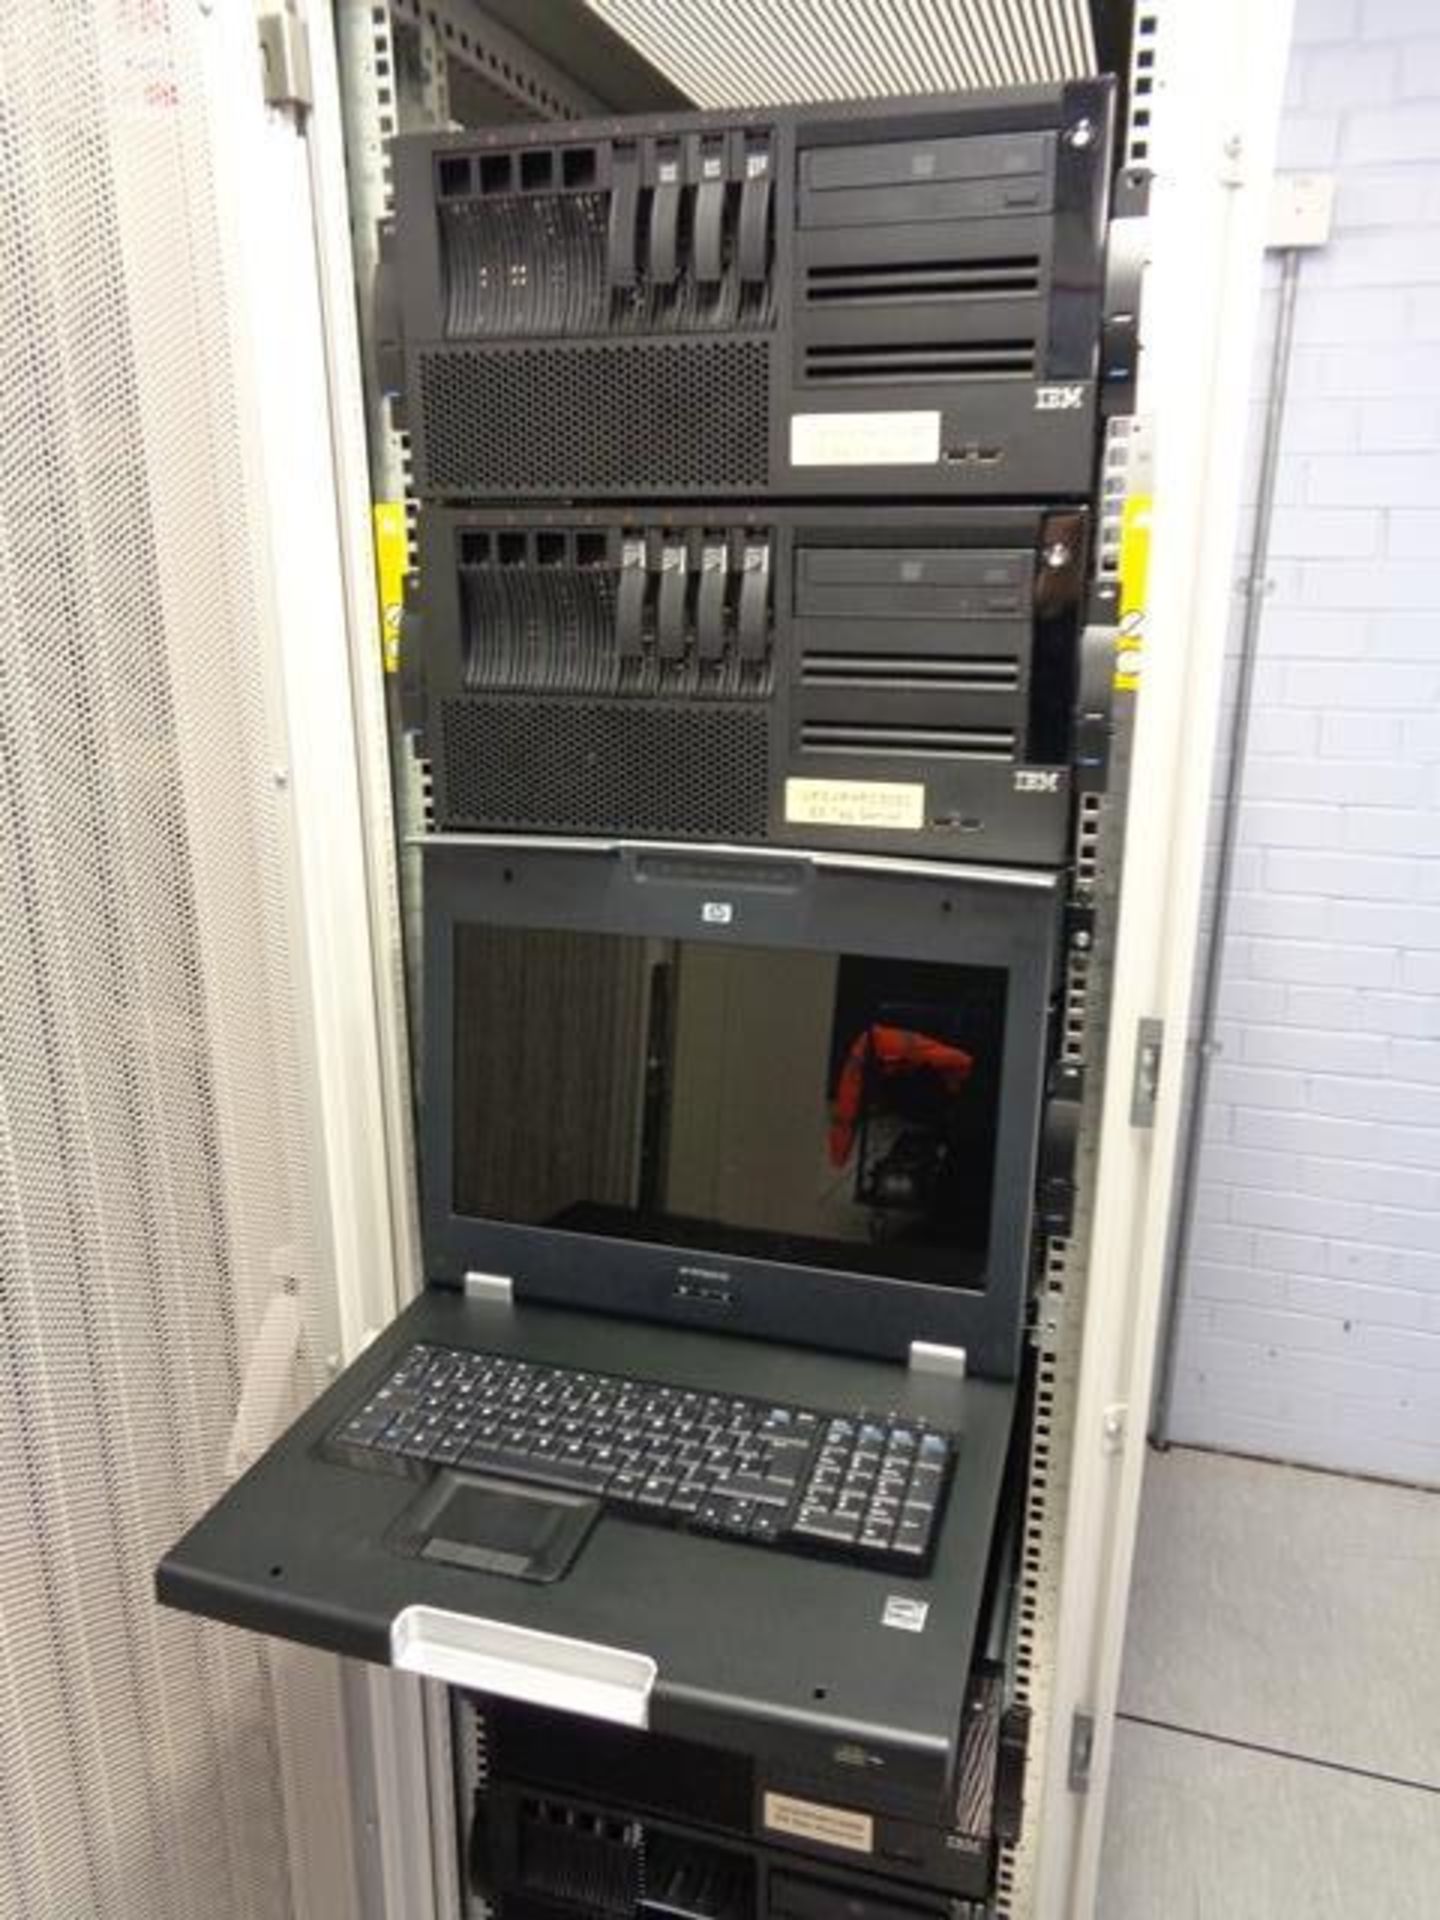 Compaq server cabinet (ref. 5/24) and contents, to include six various IBM servers, IBM system - Image 2 of 3